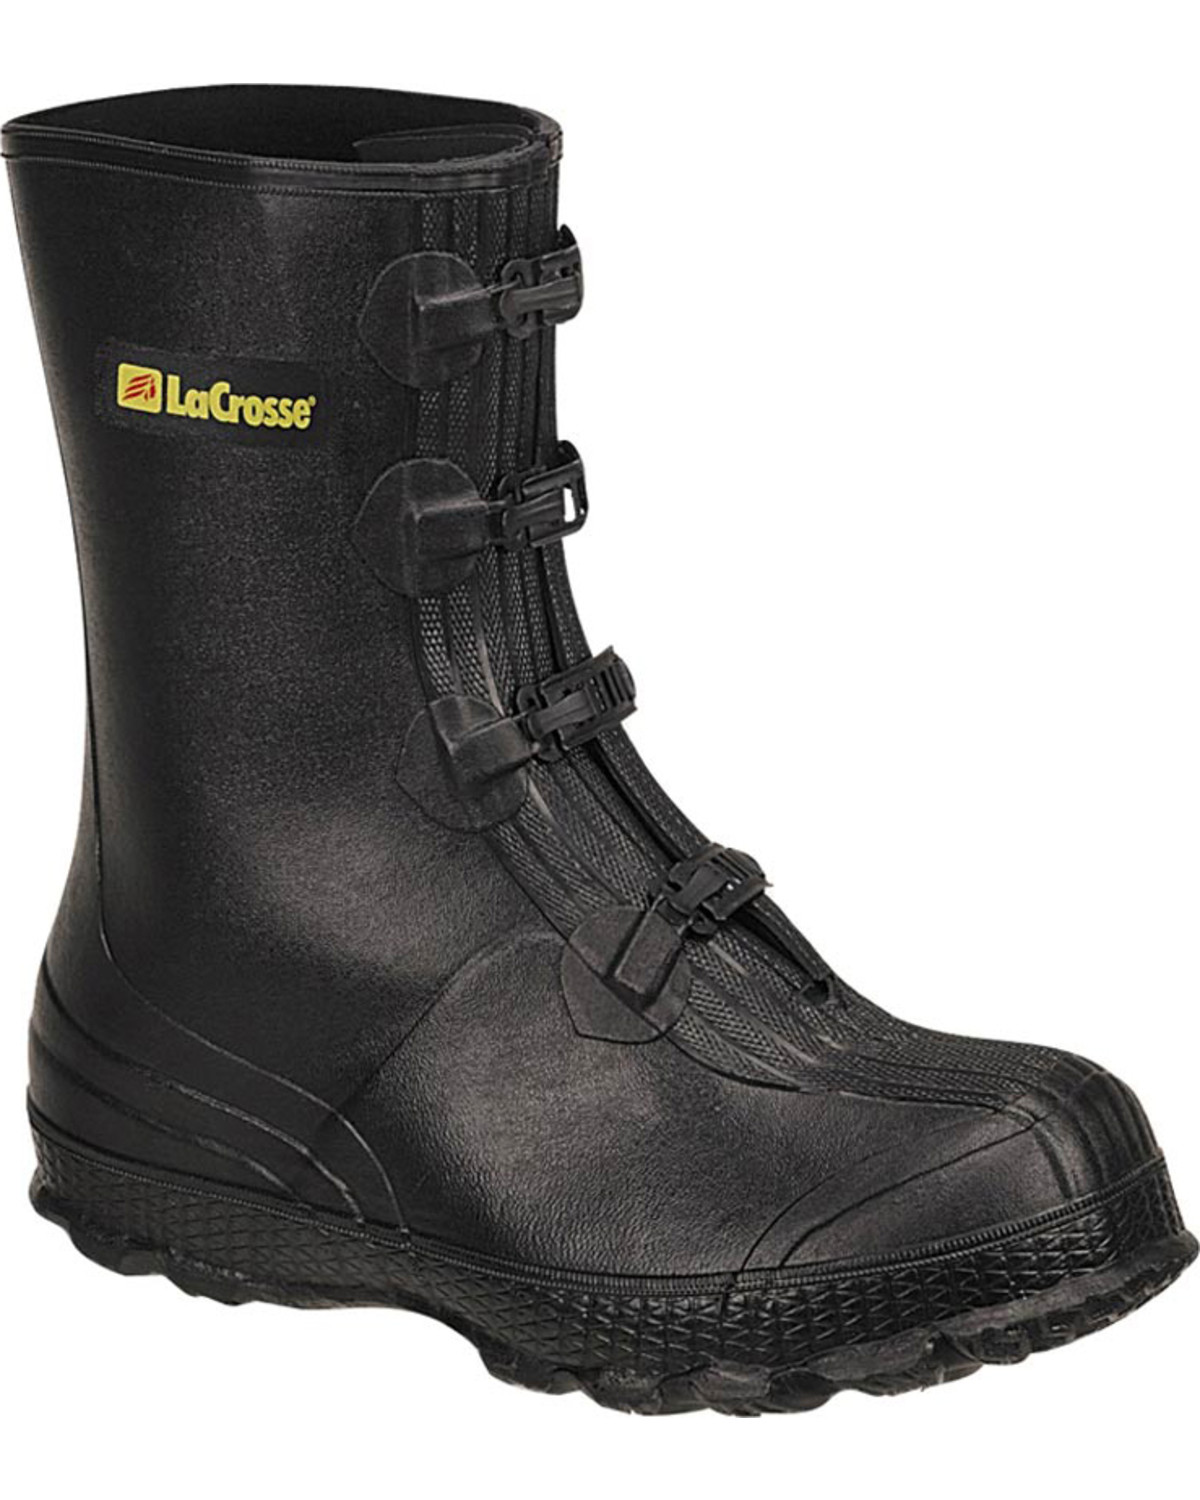 LaCrosse Men's Z-Series Overshoes Rubber Boots - Round Toe